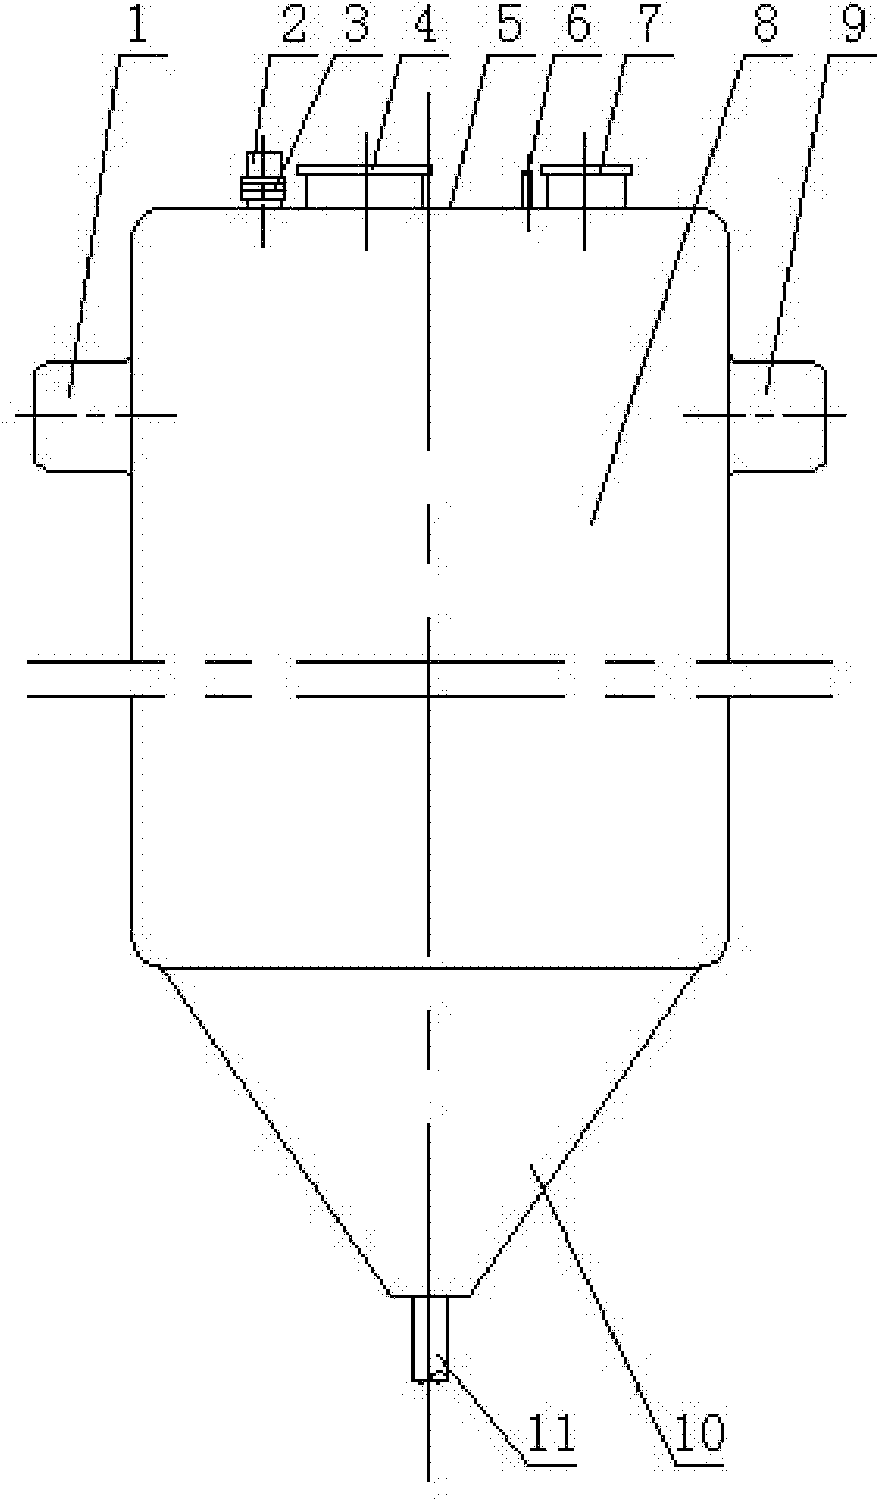 Prefabricated reaction tank for biological contact oxidation for sewage pretreatment